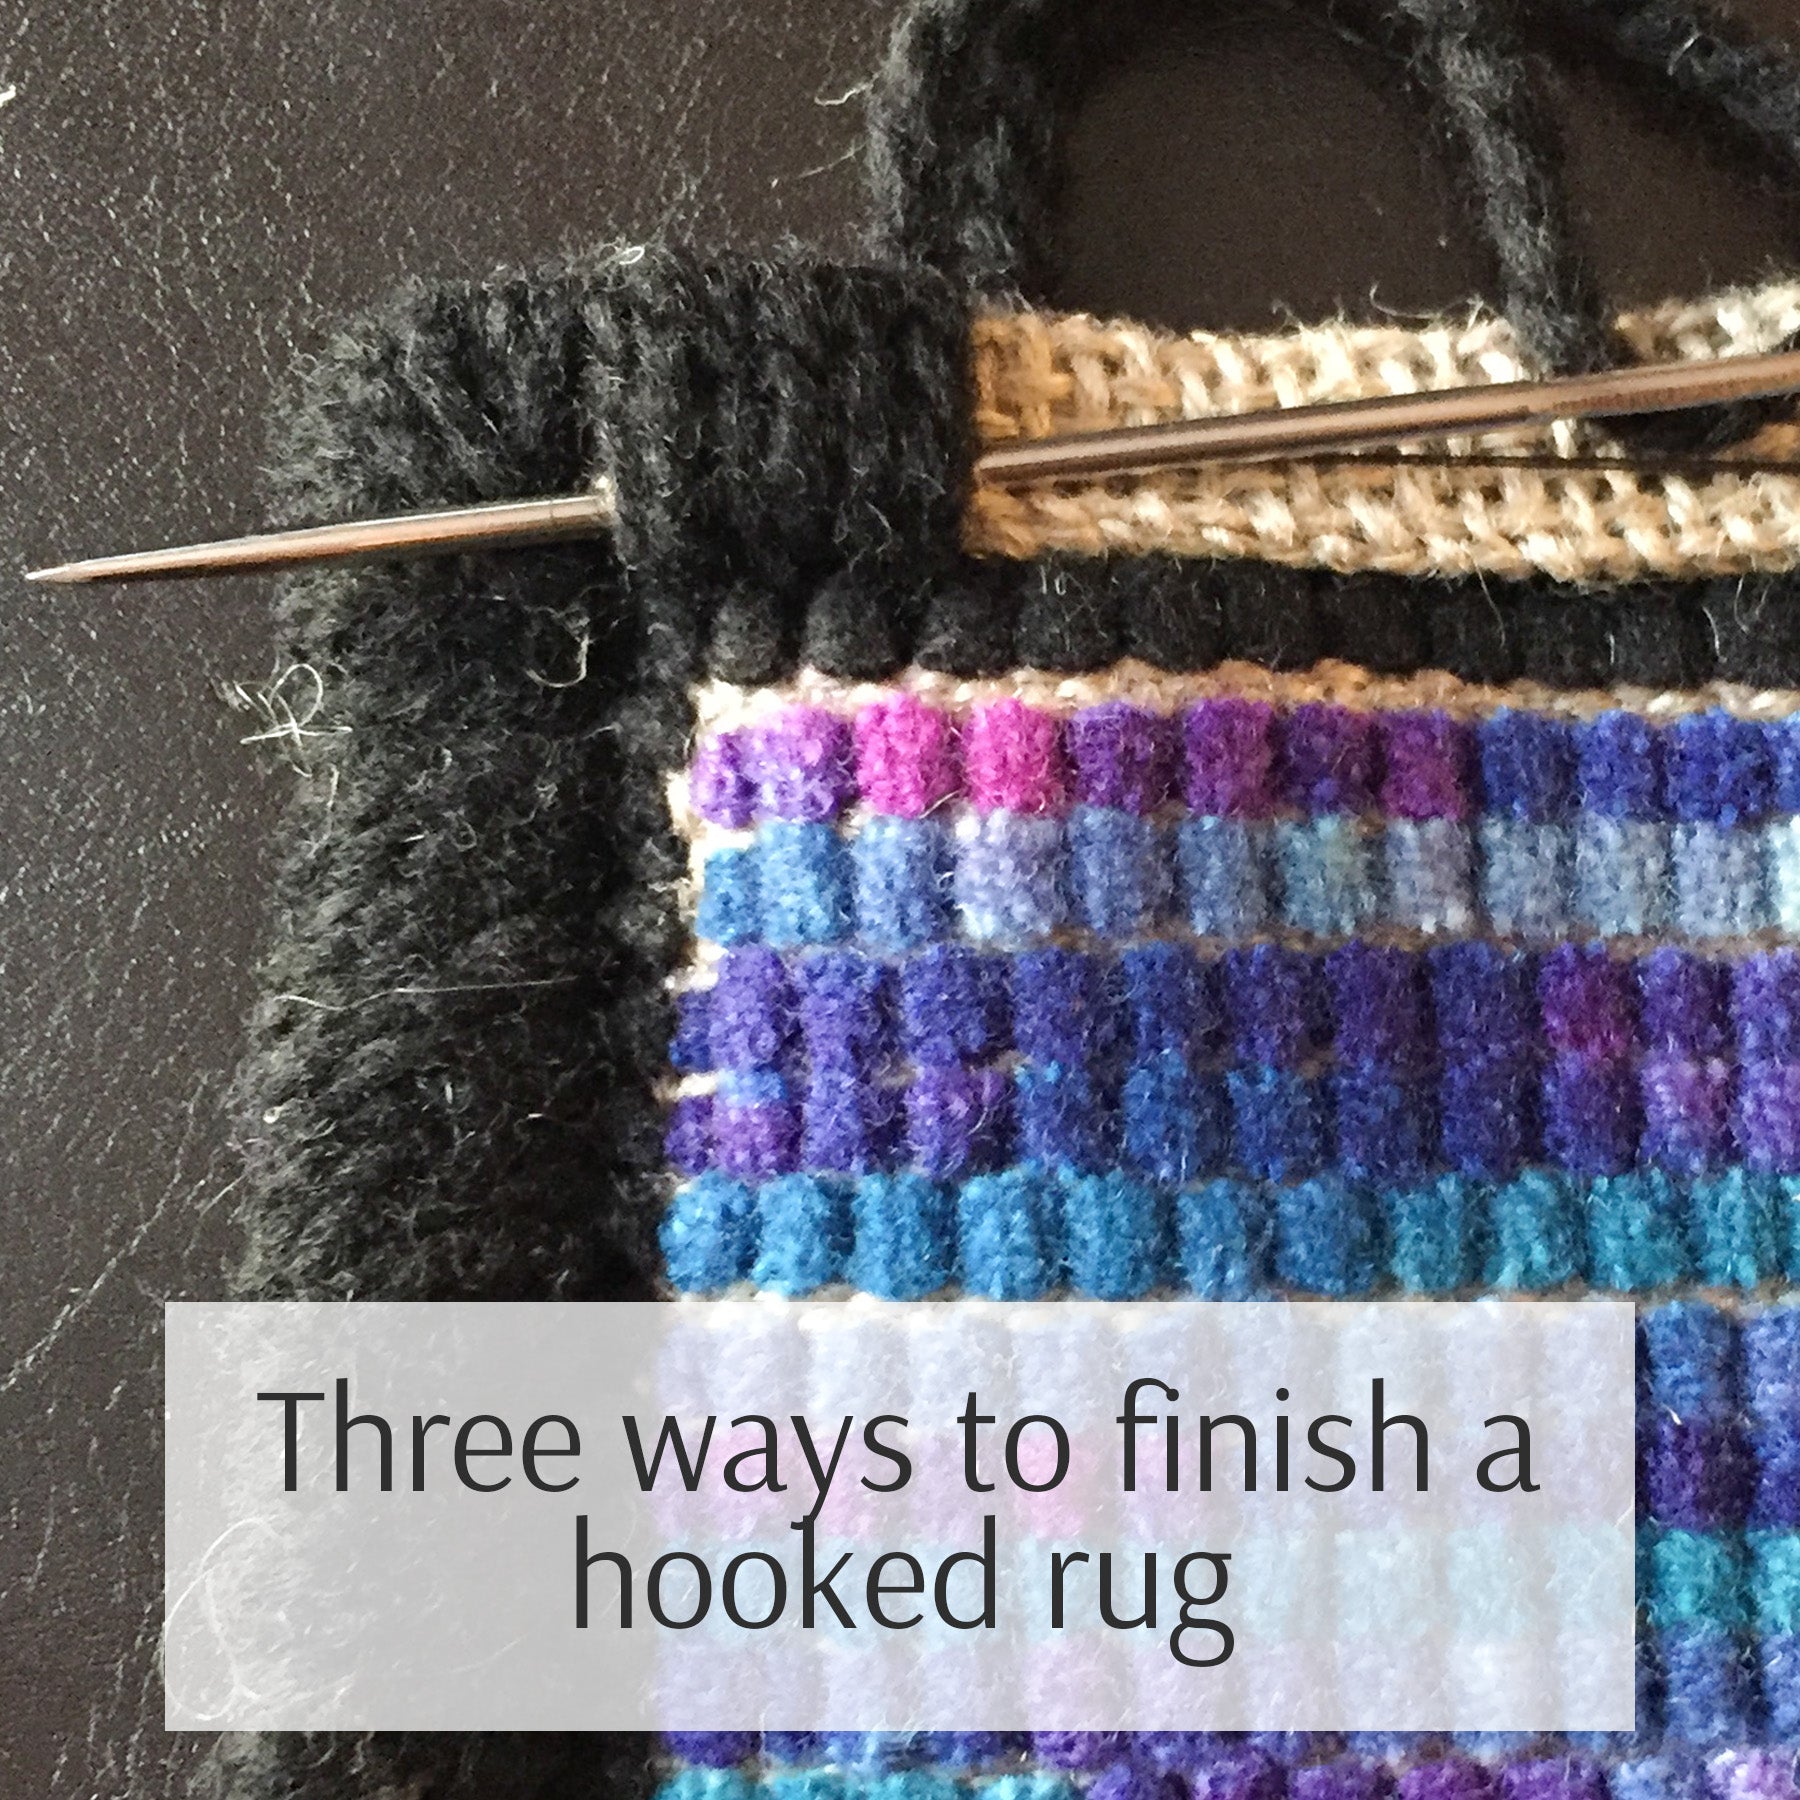 Finishing edges on a rug hooking project